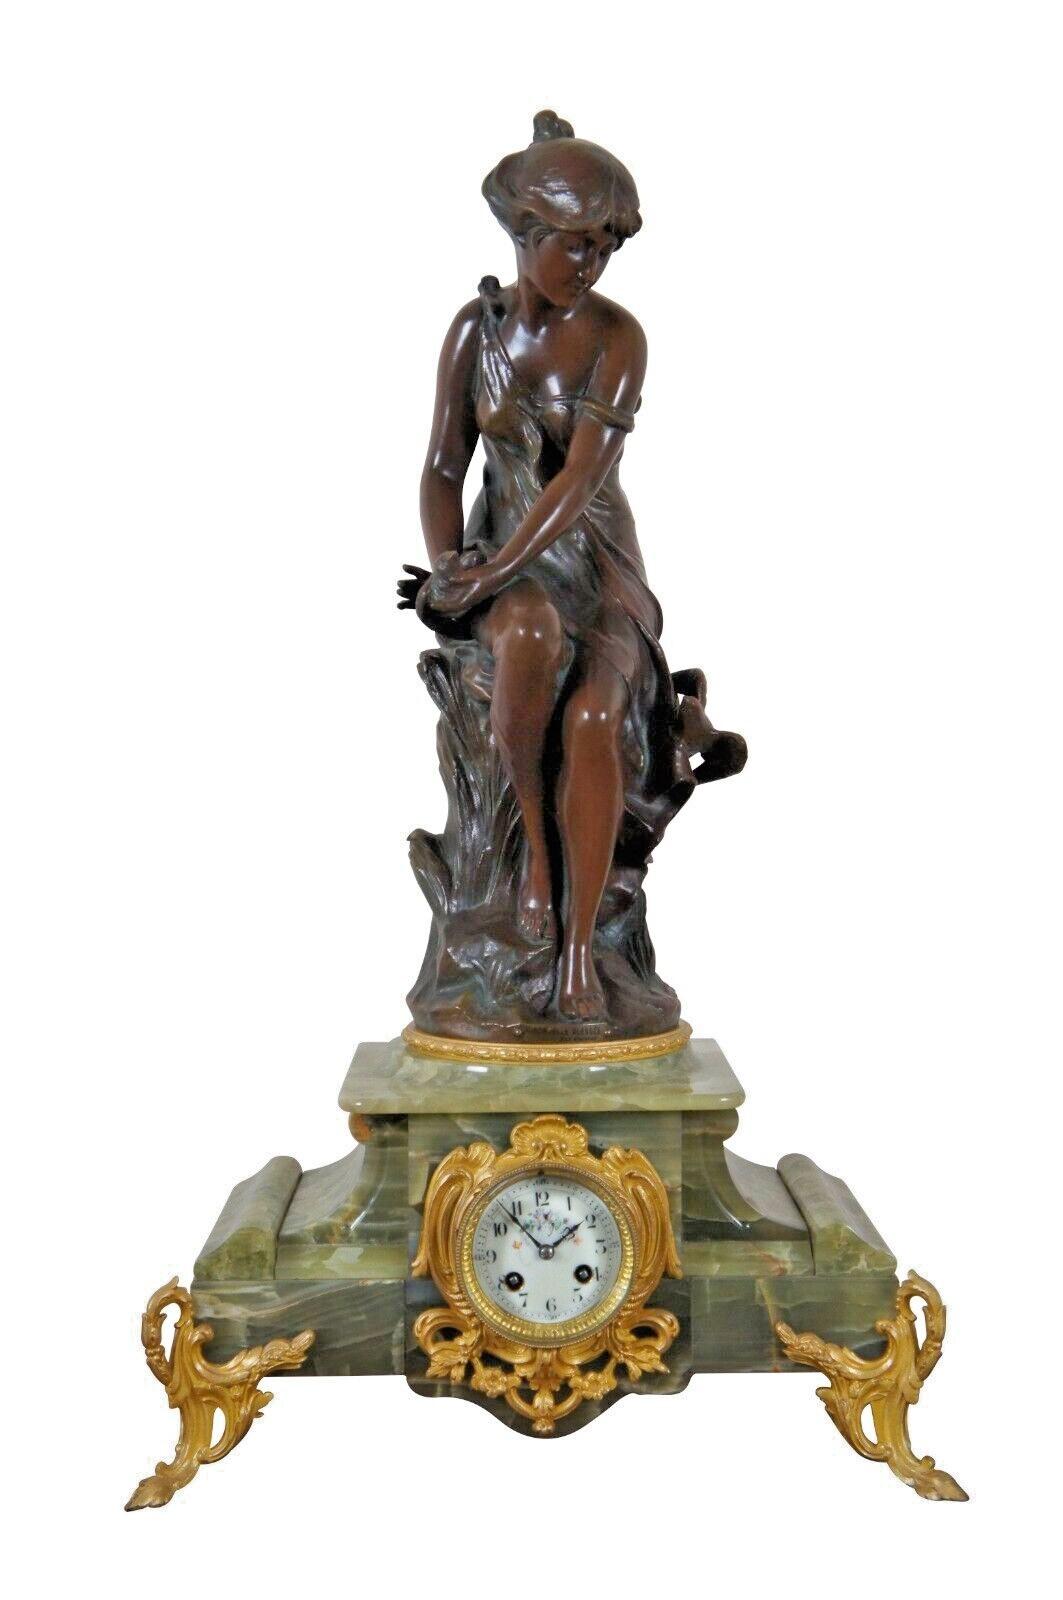 Antique three piece set garniture clock made of bronze with green marble bases and gilt feet. Mantel clock features the sculpture Hirondelle Blessee by Alfred Jean Foretay above a gilt framed, white porcelain clock face with hand painted florals and